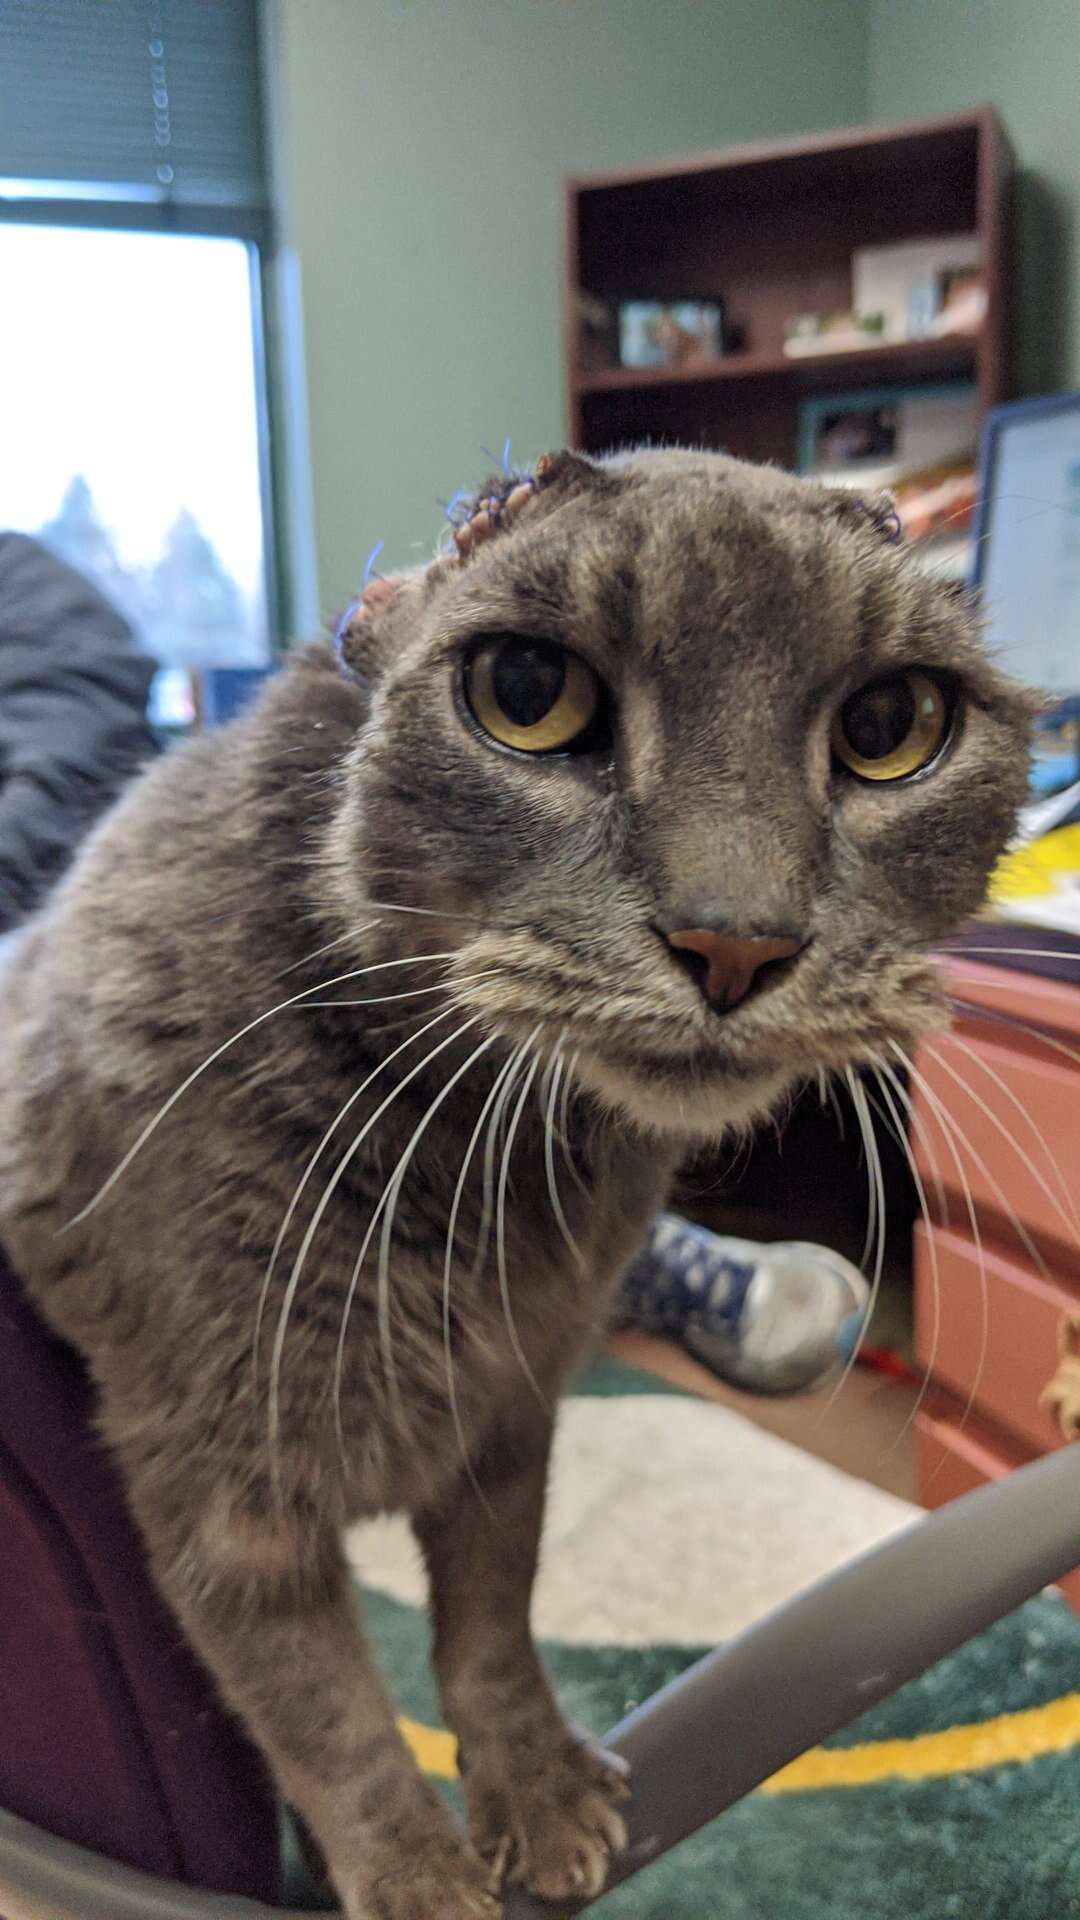 Shelter Cat With No Ears Gets Special Hat - The Dodo